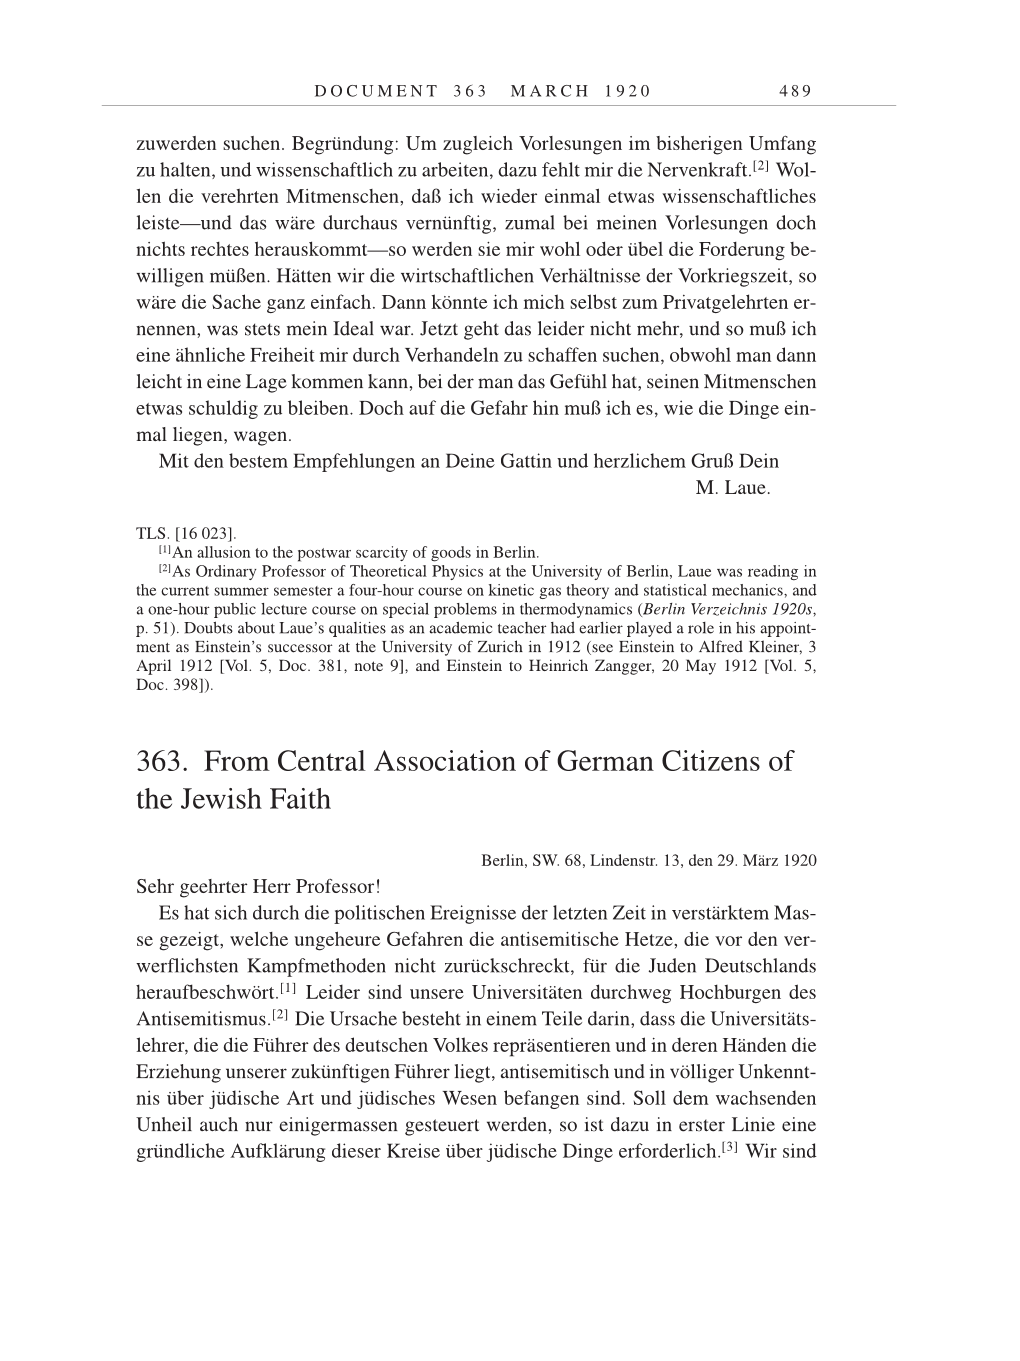 Volume 9: The Berlin Years: Correspondence January 1919-April 1920 page 489